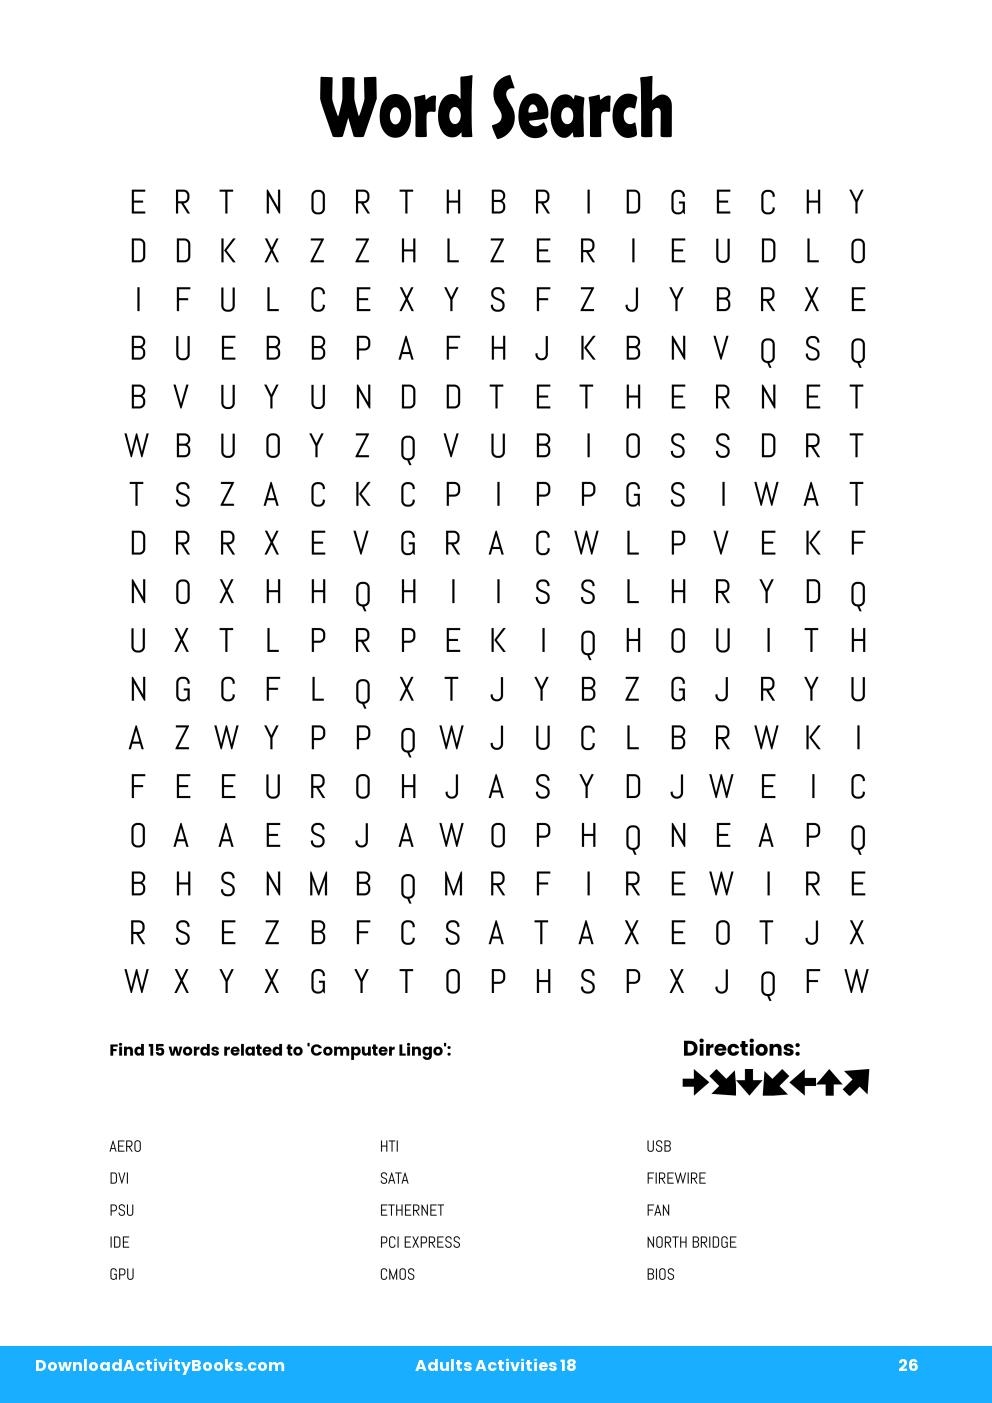 Word Search in Adults Activities 18